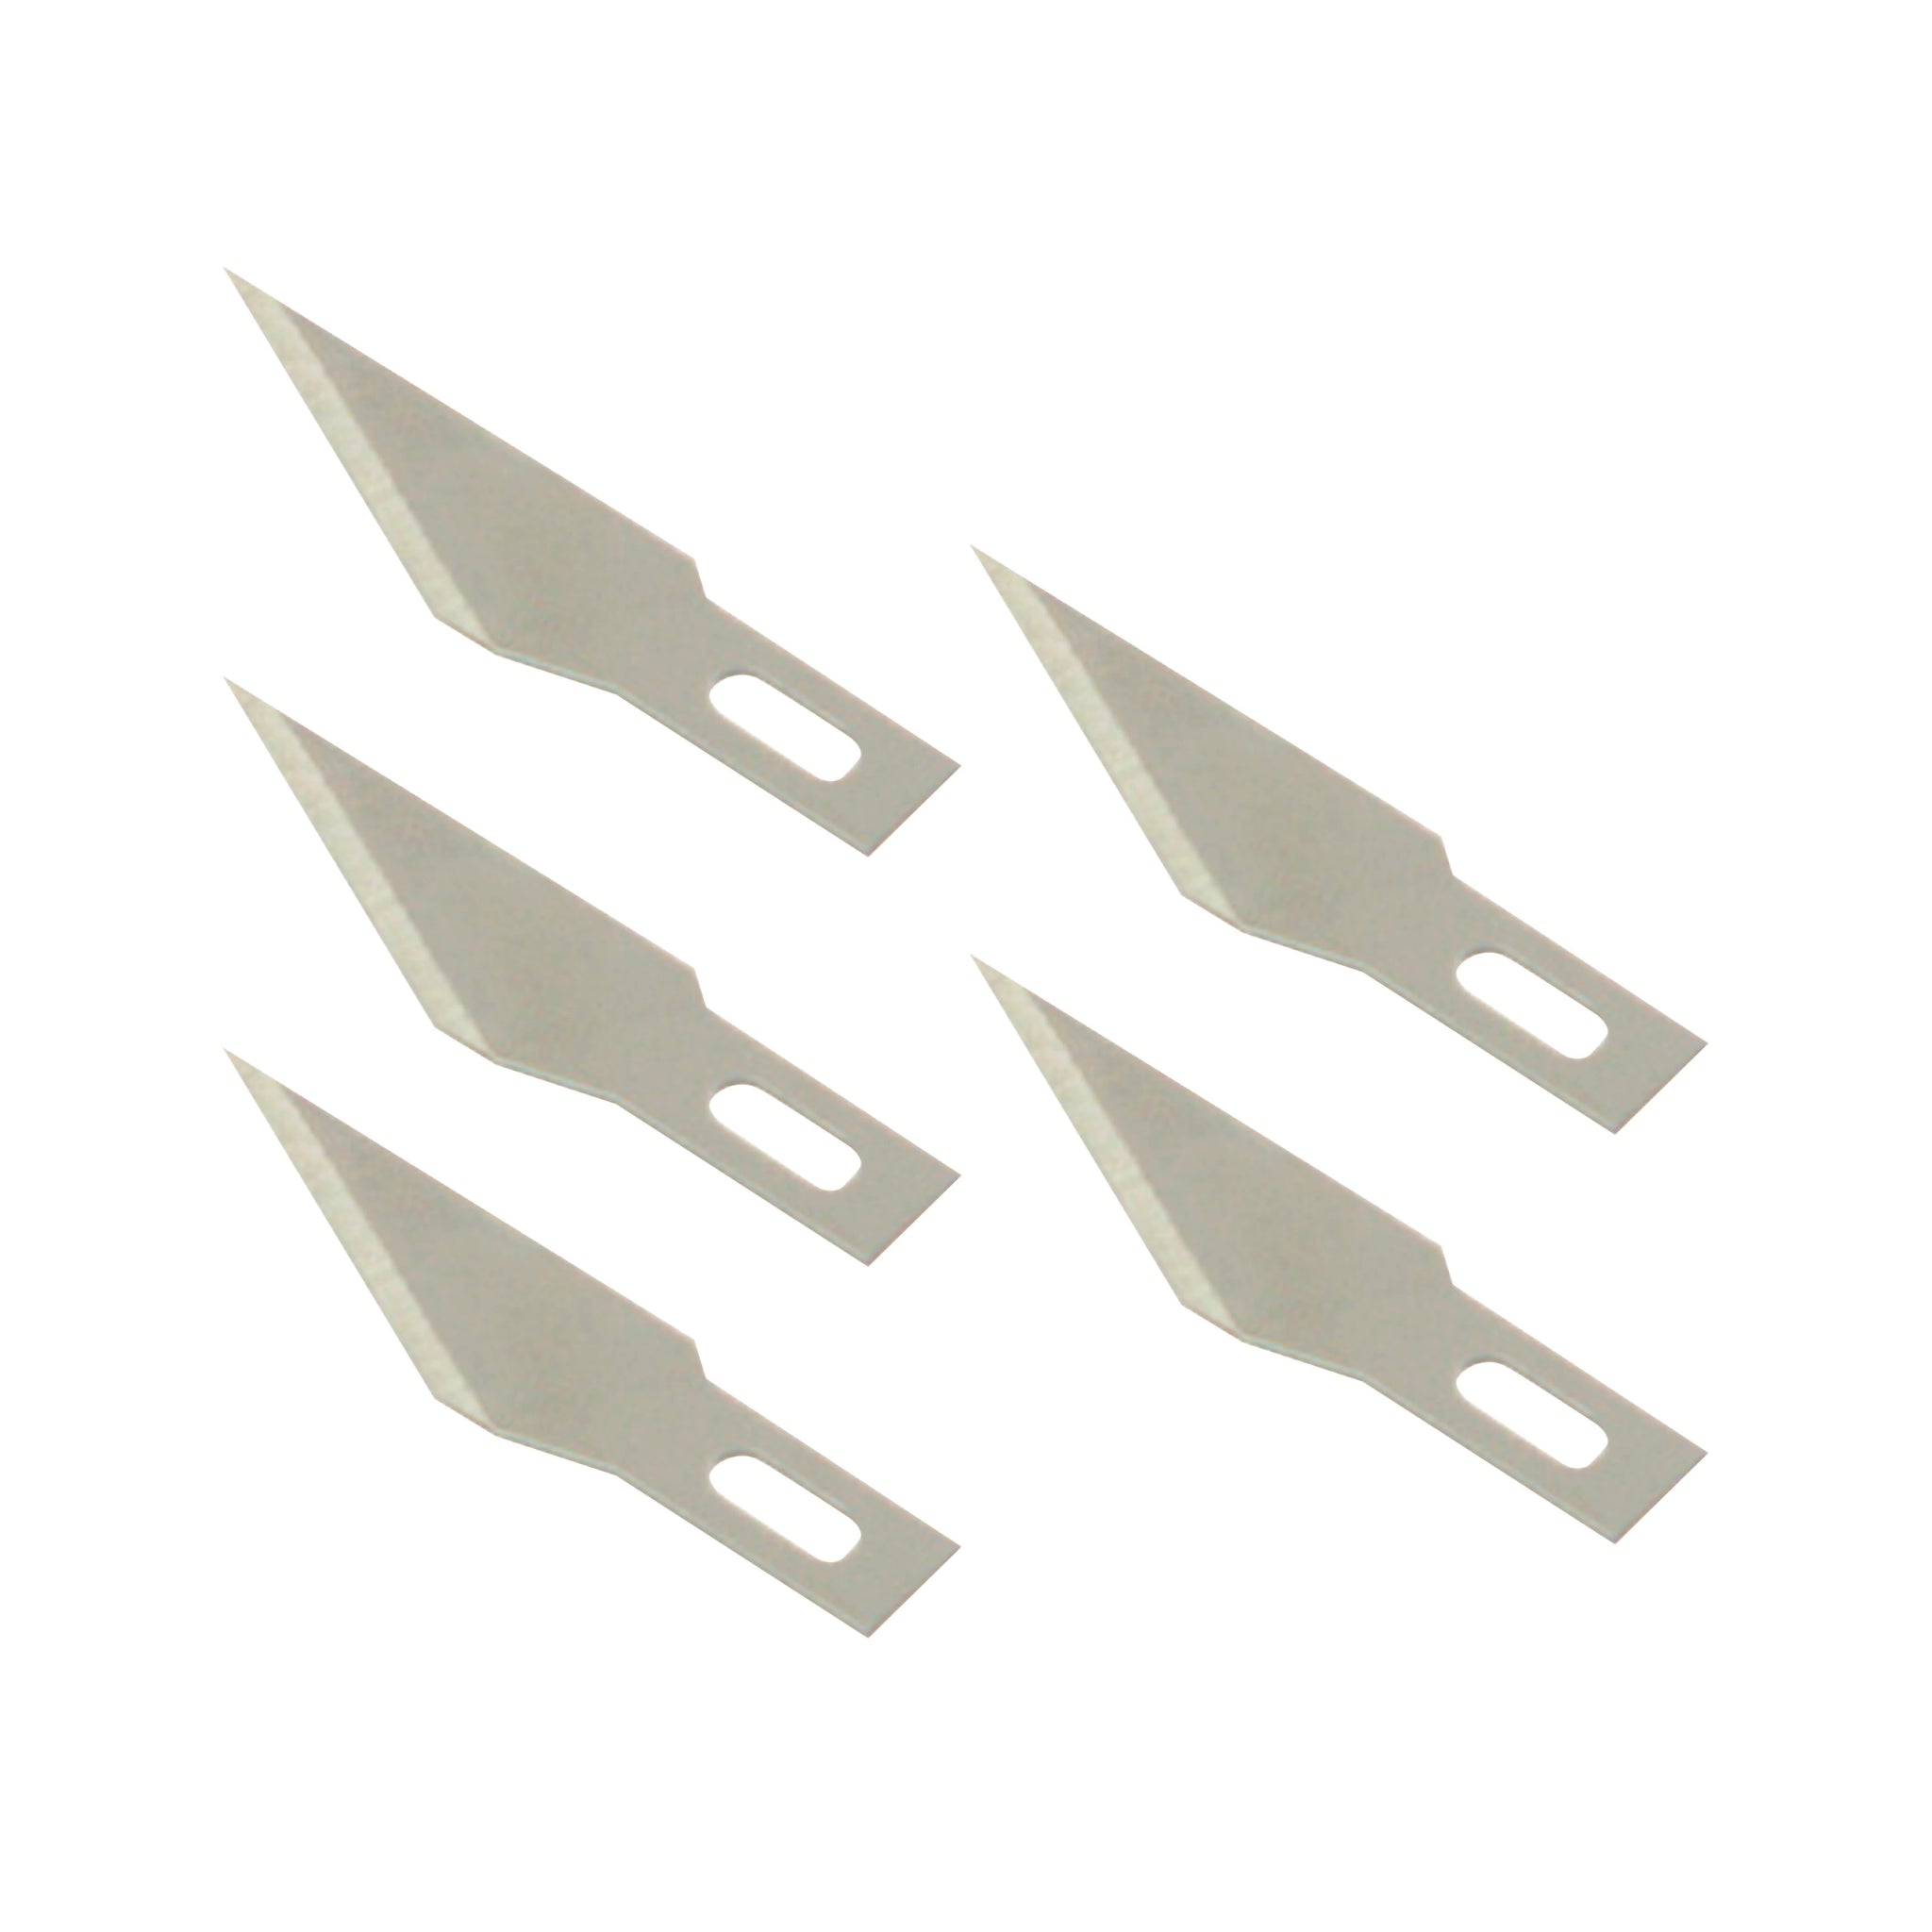 Couture Creations - Tool Craft Knife Replacement Blades 5pcs - Crafty Divas